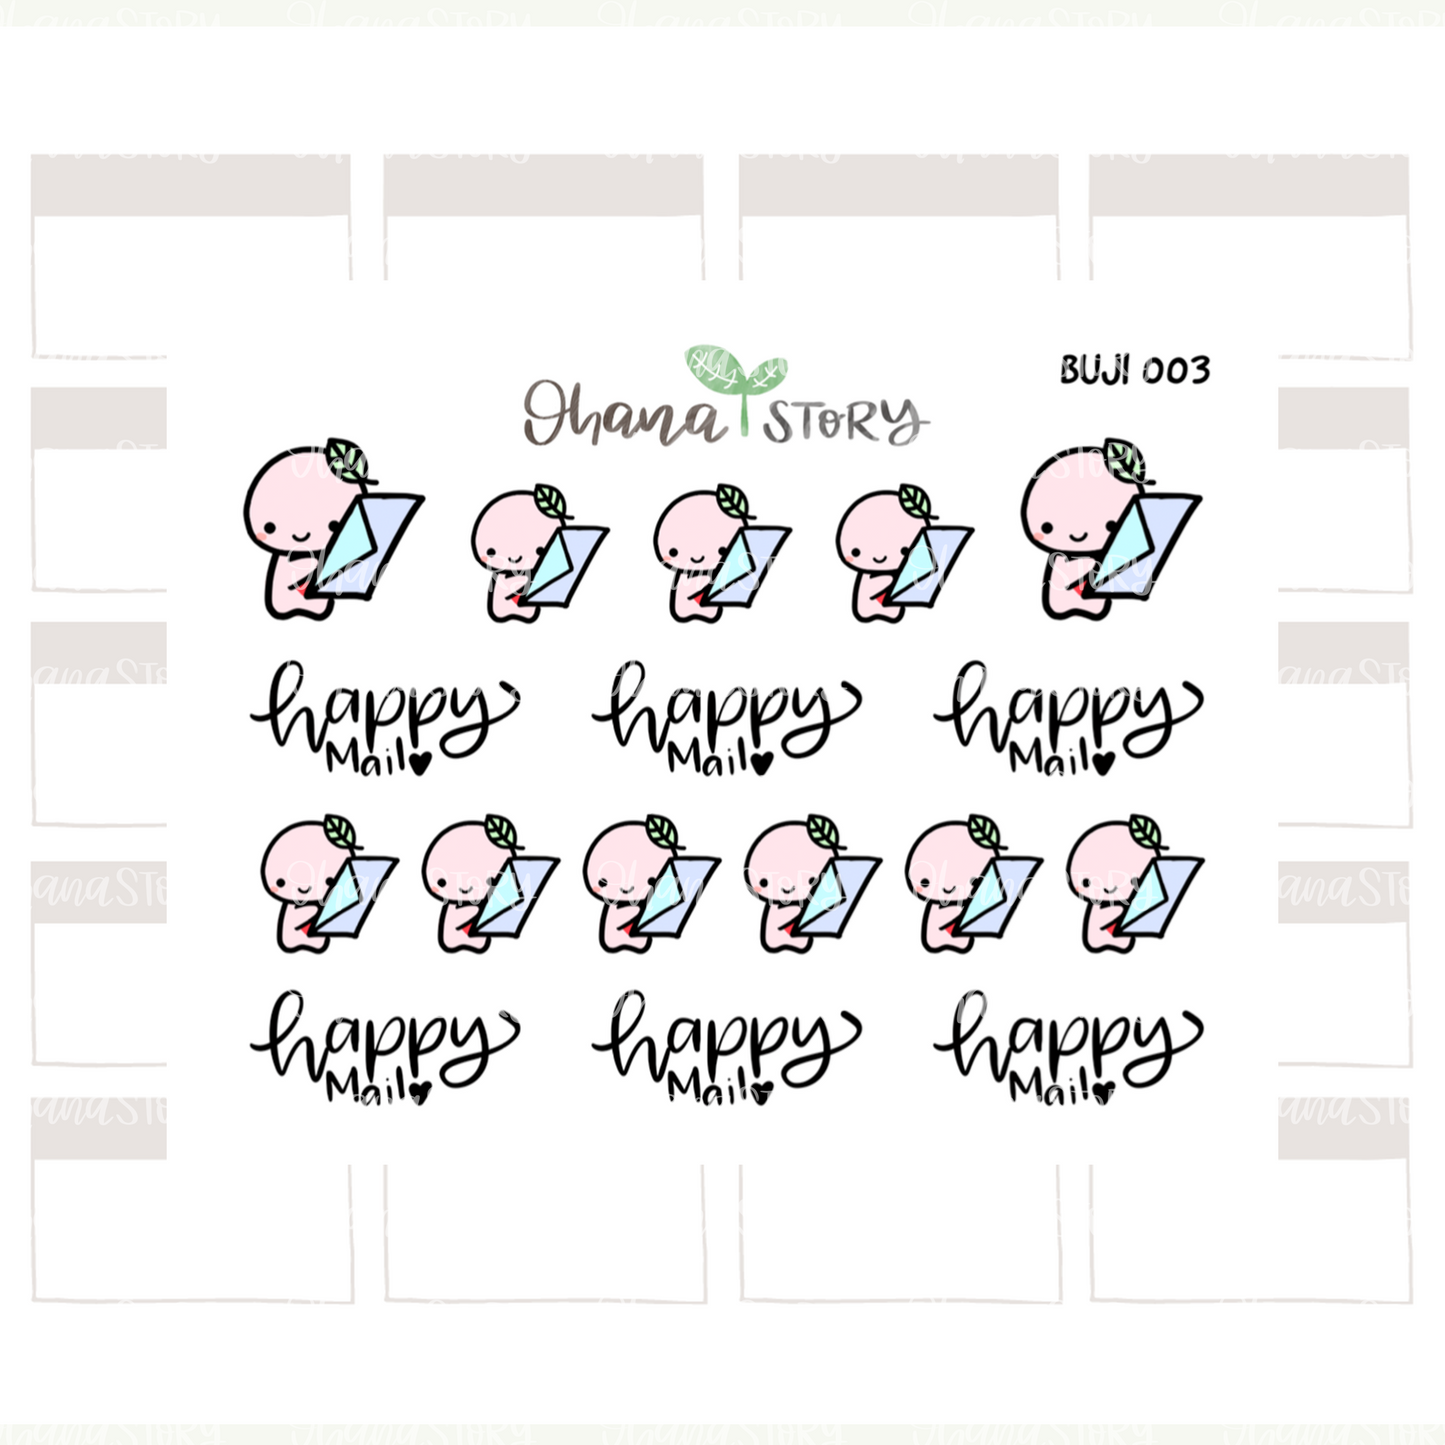 BUJI 003 | Happy Mail | Hand Drawn Planner Stickers